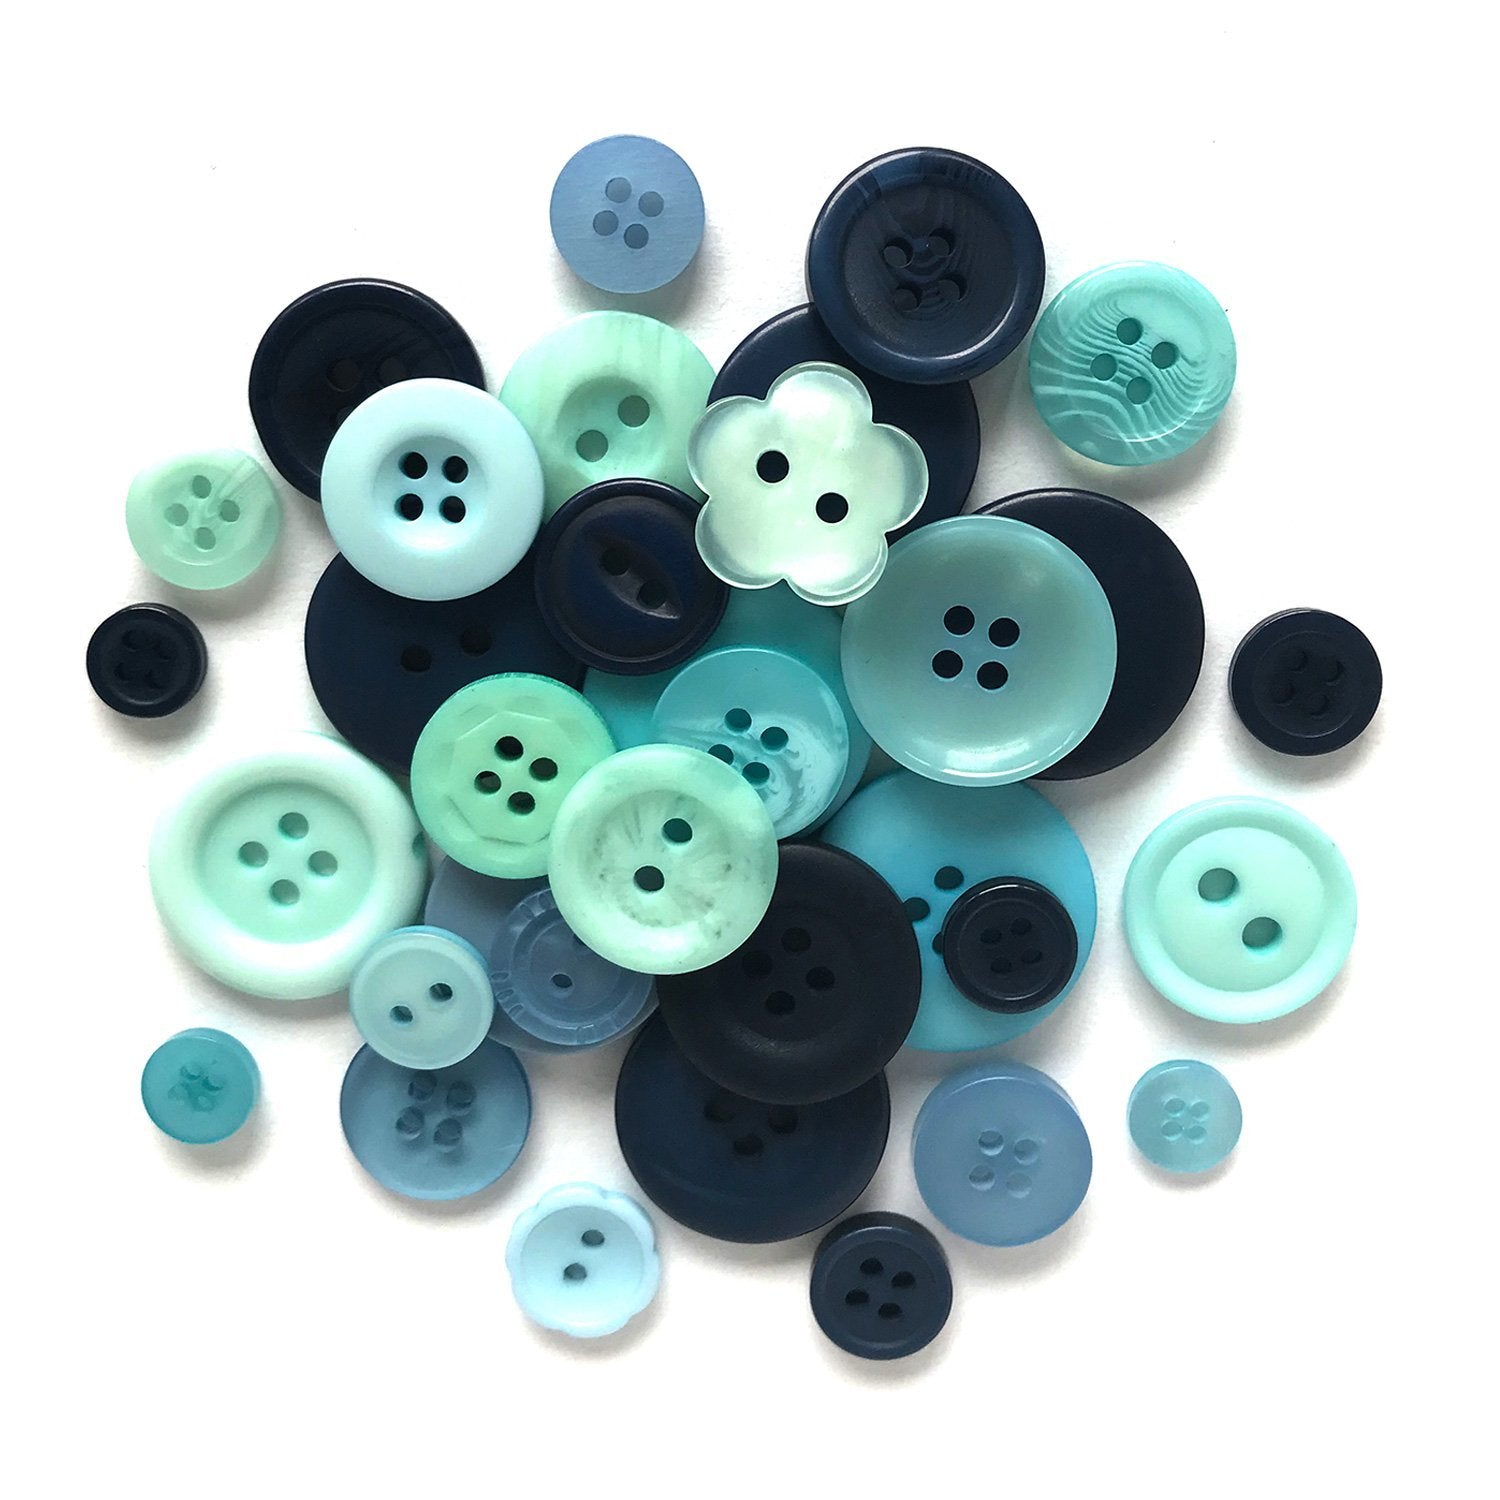 Dark Blue Buttons for Crafts Sewing Scrapbooks and Quilts. Assorted sizes  including small dark blue buttons